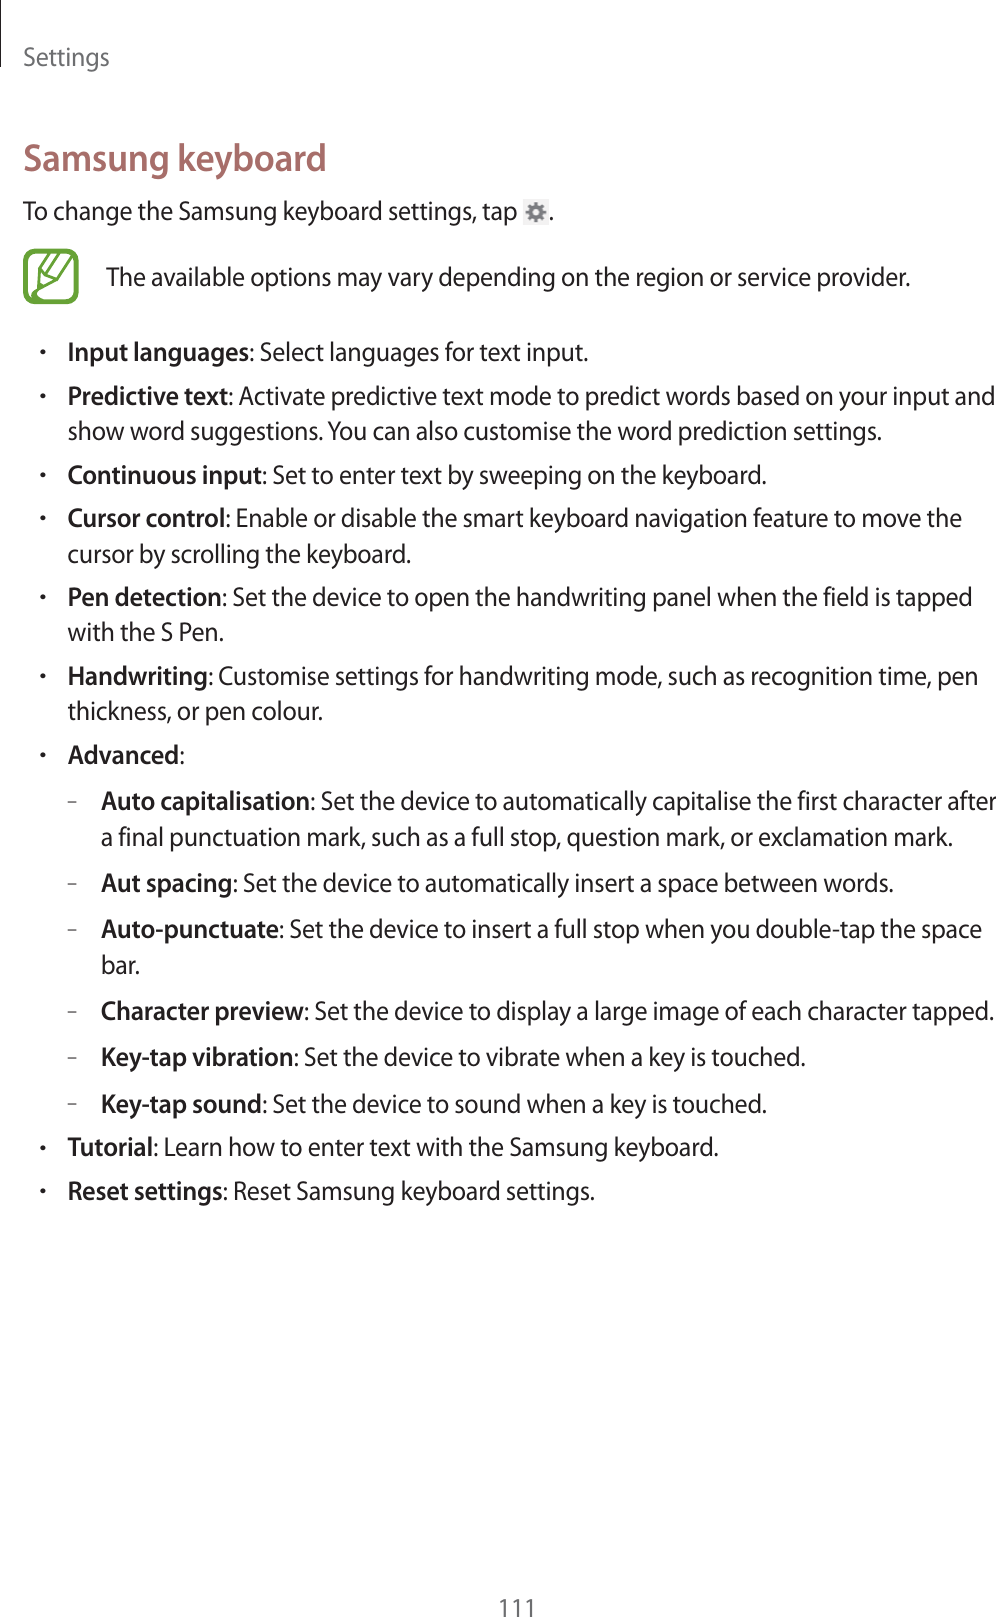 Settings111Samsung keyboardTo change the Samsung keyboard settings, tap  .The available options may vary depending on the region or service provider.rInput languages: Select languages for text input.rPredictive text: Activate predictive text mode to predict words based on your input and show word suggestions. You can also customise the word prediction settings.rContinuous input: Set to enter text by sweeping on the keyboard.rCursor control: Enable or disable the smart keyboard navigation feature to move the cursor by scrolling the keyboard.rPen detection: Set the device to open the handwriting panel when the field is tapped with the S Pen.rHandwriting: Customise settings for handwriting mode, such as recognition time, pen thickness, or pen colour.rAdvanced:–Auto capitalisation: Set the device to automatically capitalise the first character after a final punctuation mark, such as a full stop, question mark, or exclamation mark.–Aut spacing: Set the device to automatically insert a space between words.–Auto-punctuate: Set the device to insert a full stop when you double-tap the space bar.–Character preview: Set the device to display a large image of each character tapped.–Key-tap vibration: Set the device to vibrate when a key is touched.–Key-tap sound: Set the device to sound when a key is touched.rTutorial: Learn how to enter text with the Samsung keyboard.rReset settings: Reset Samsung keyboard settings.